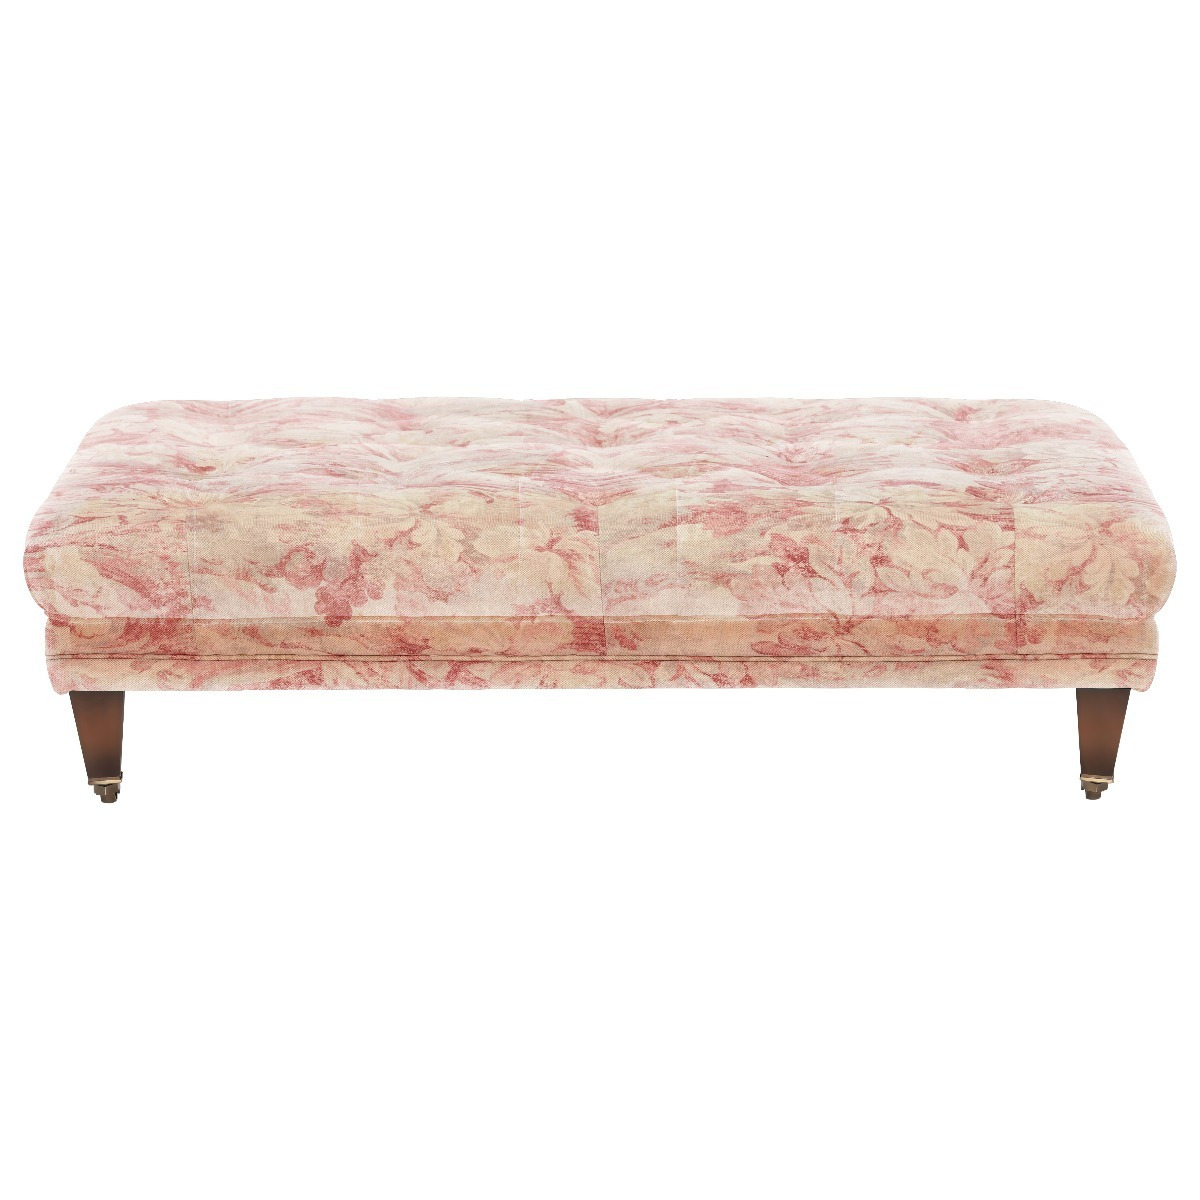 Blackwell Small Button Stool, Pink Fabric - Barker & Stonehouse - image 1